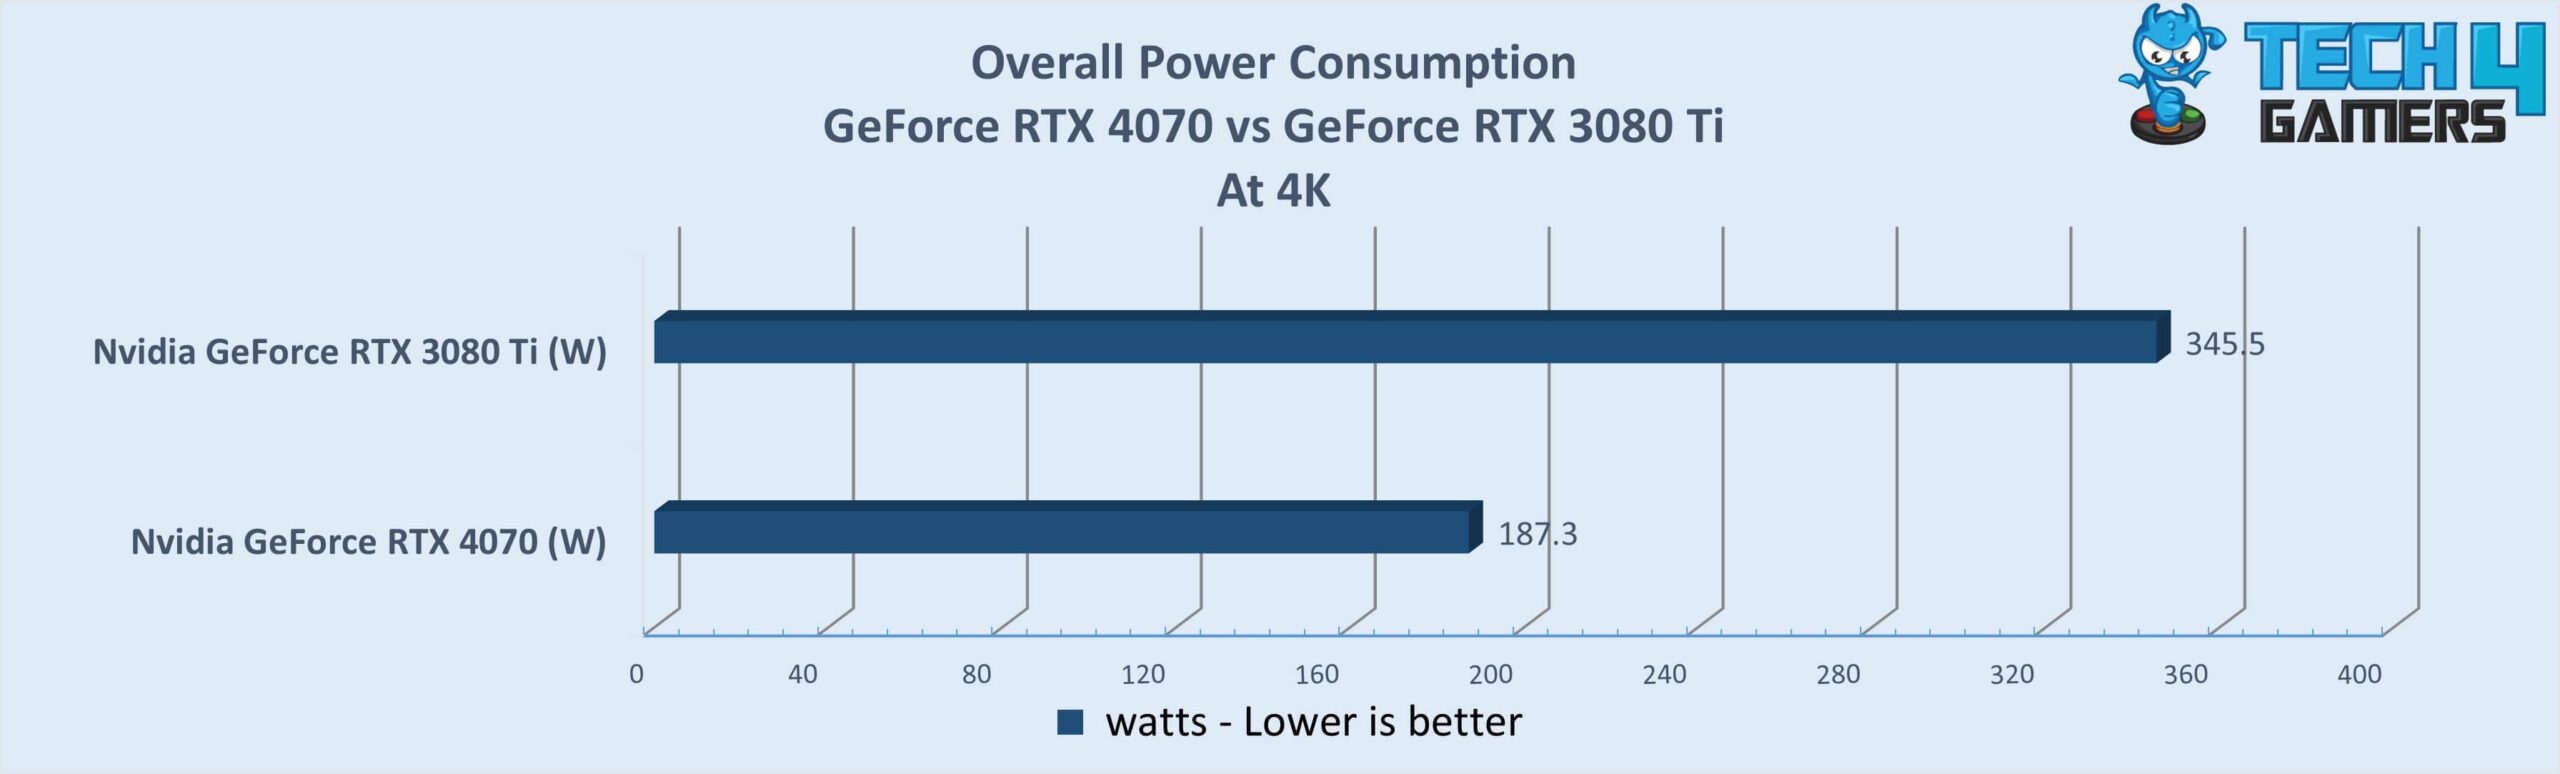 Overall Power Consumption